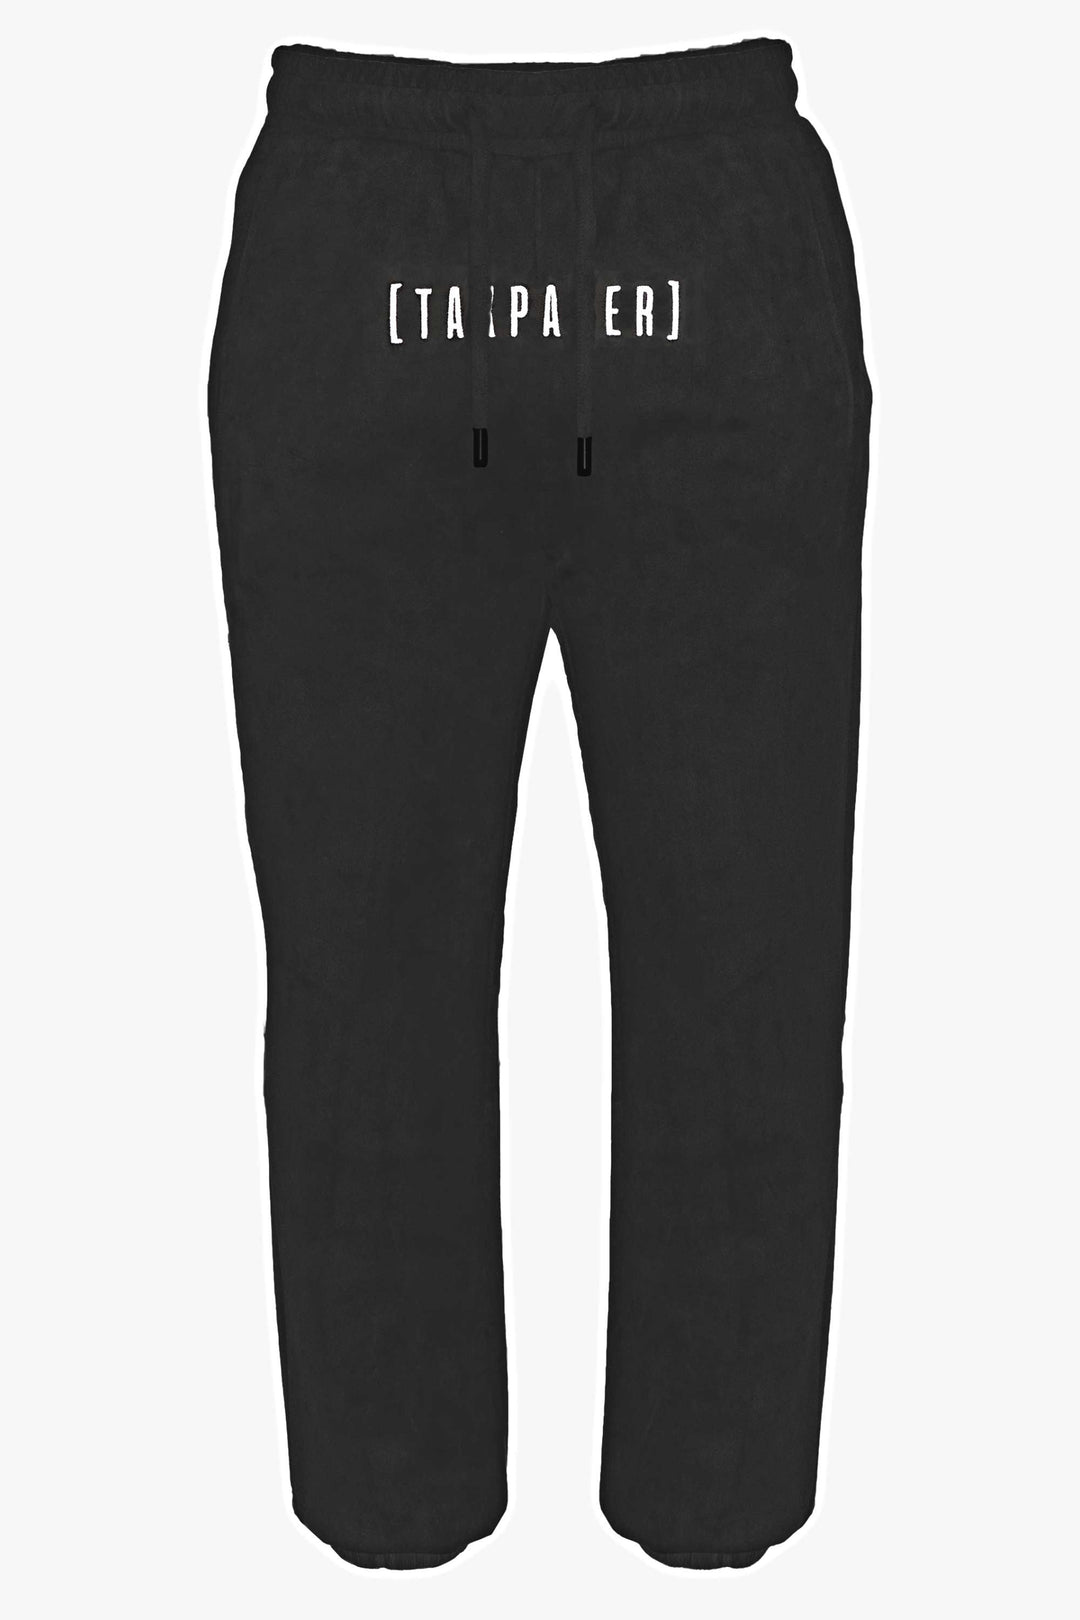 [ TAXPAYER ] BLACK SUEDE JOGGERS (v) - TAXPAYER